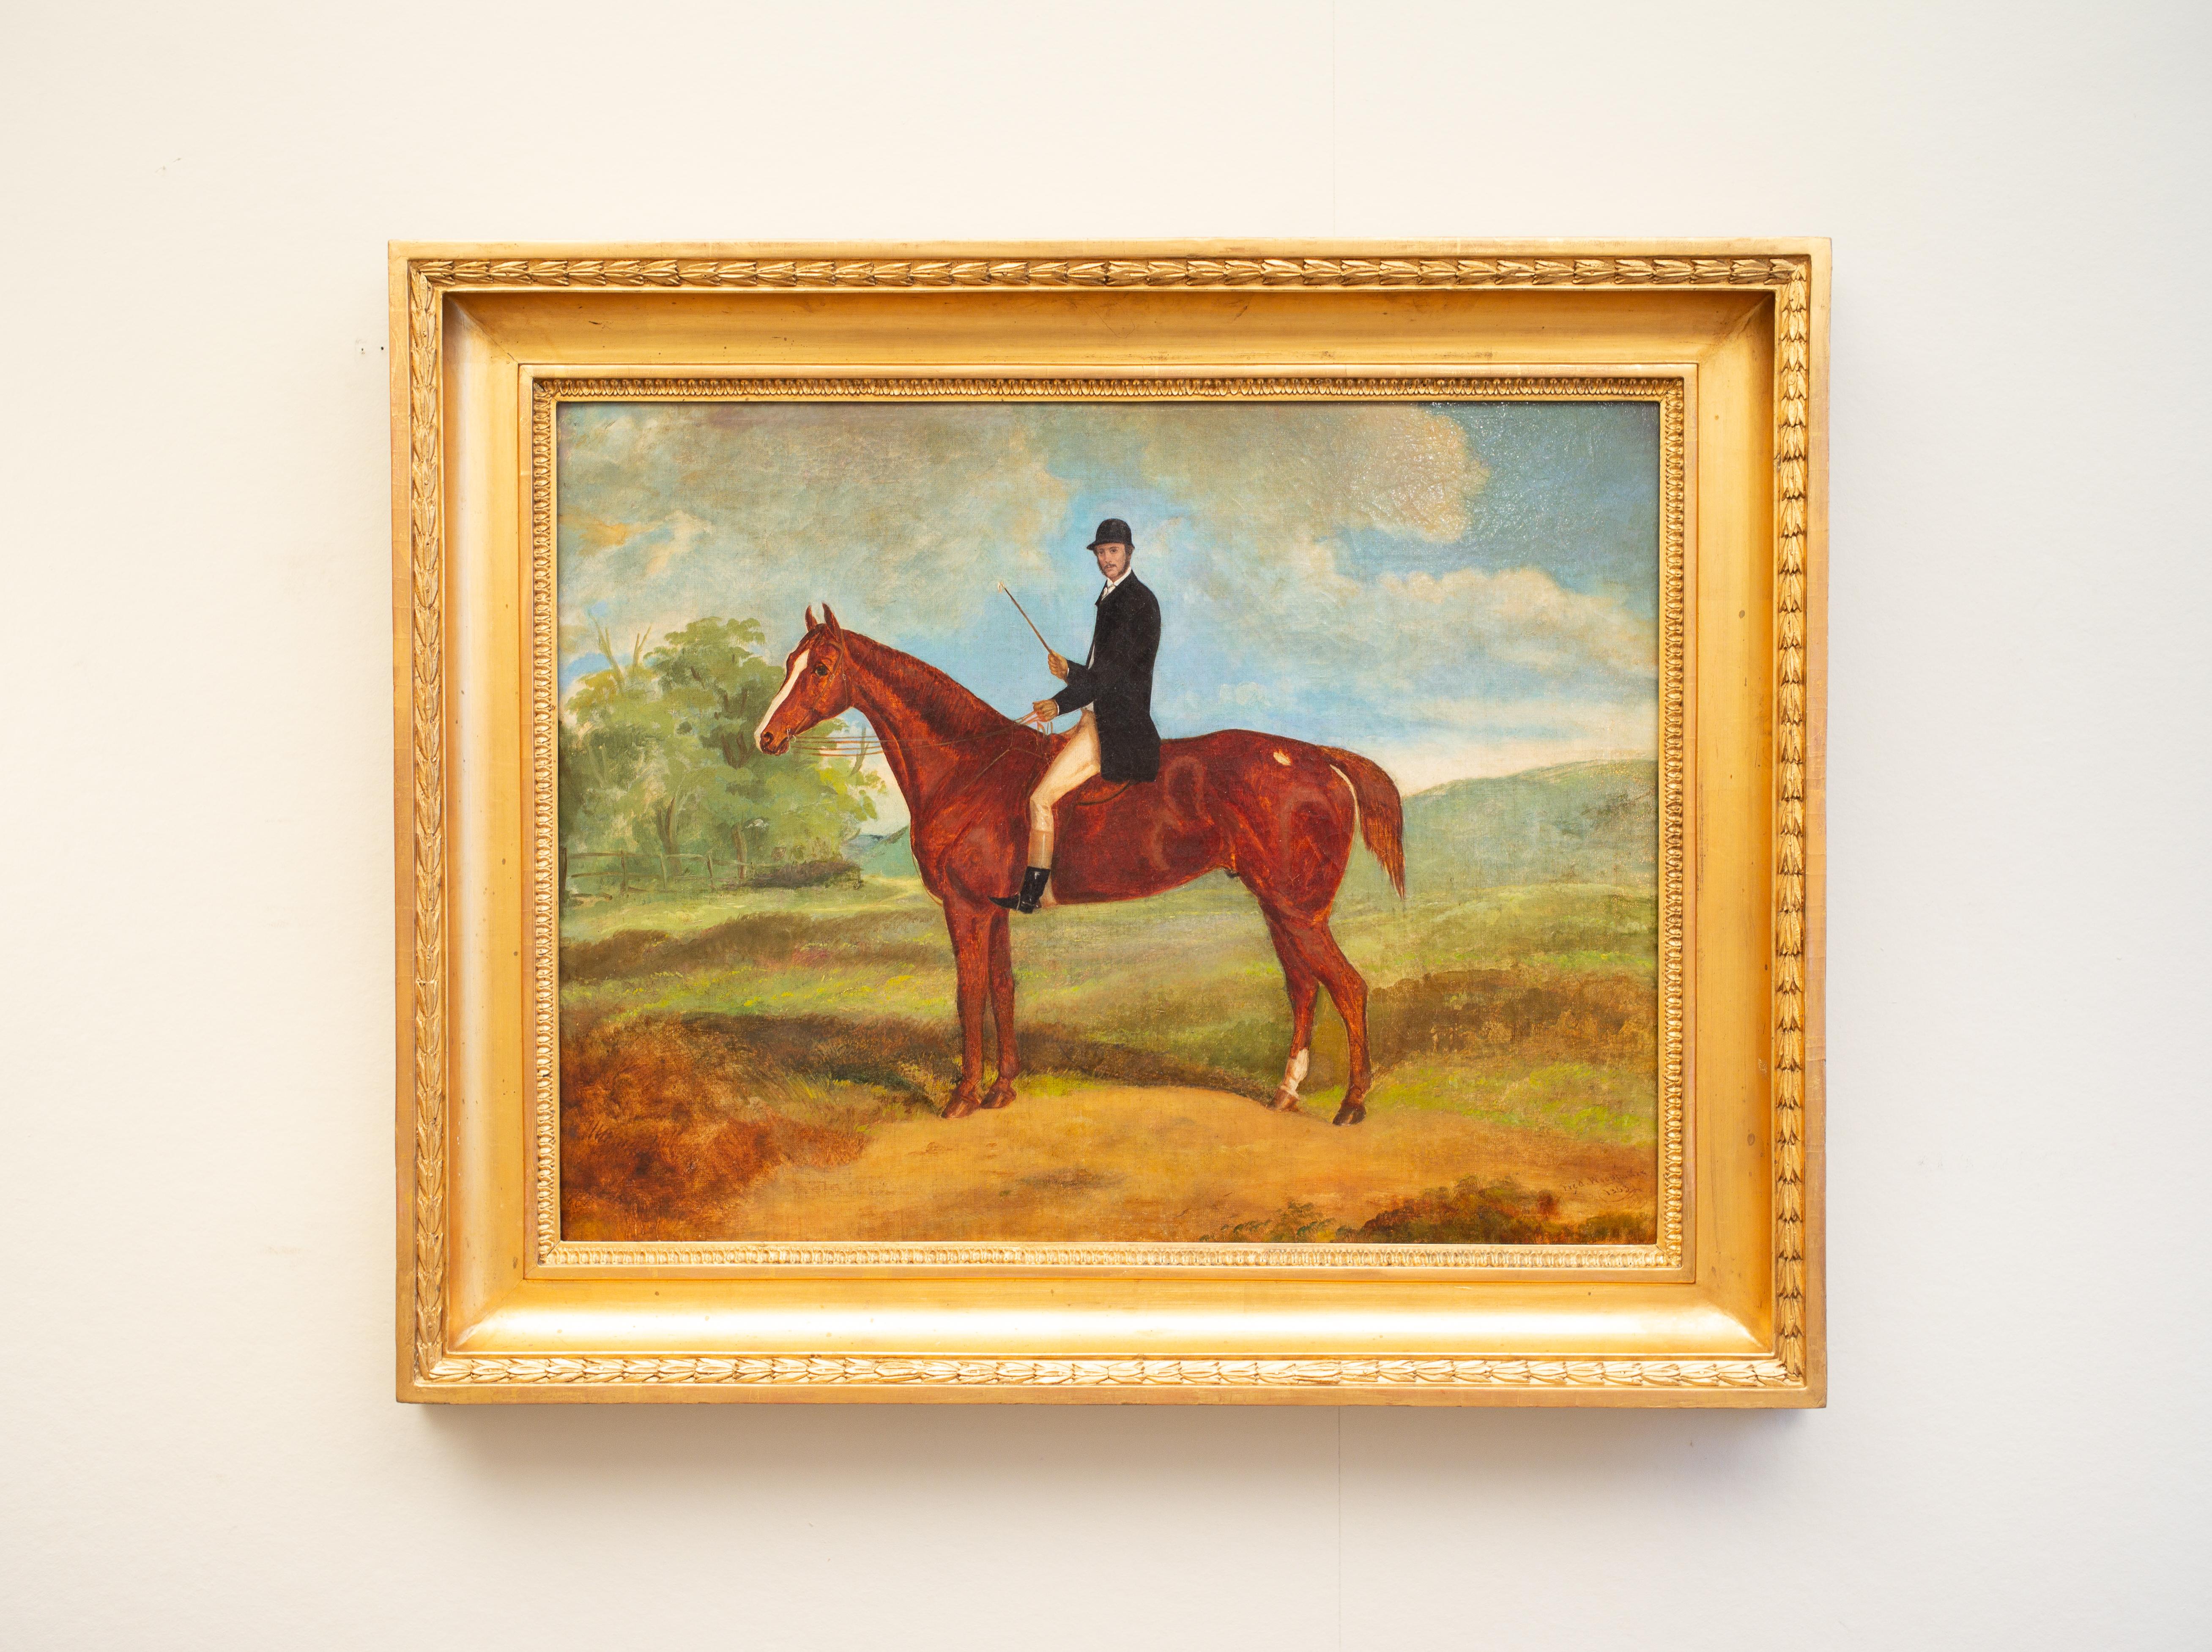 A Gentleman Rider on a Horse, Oil on Canvas, 1863, Signed, Free Shipping  - Painting by Frederick Woodhouse Sr.